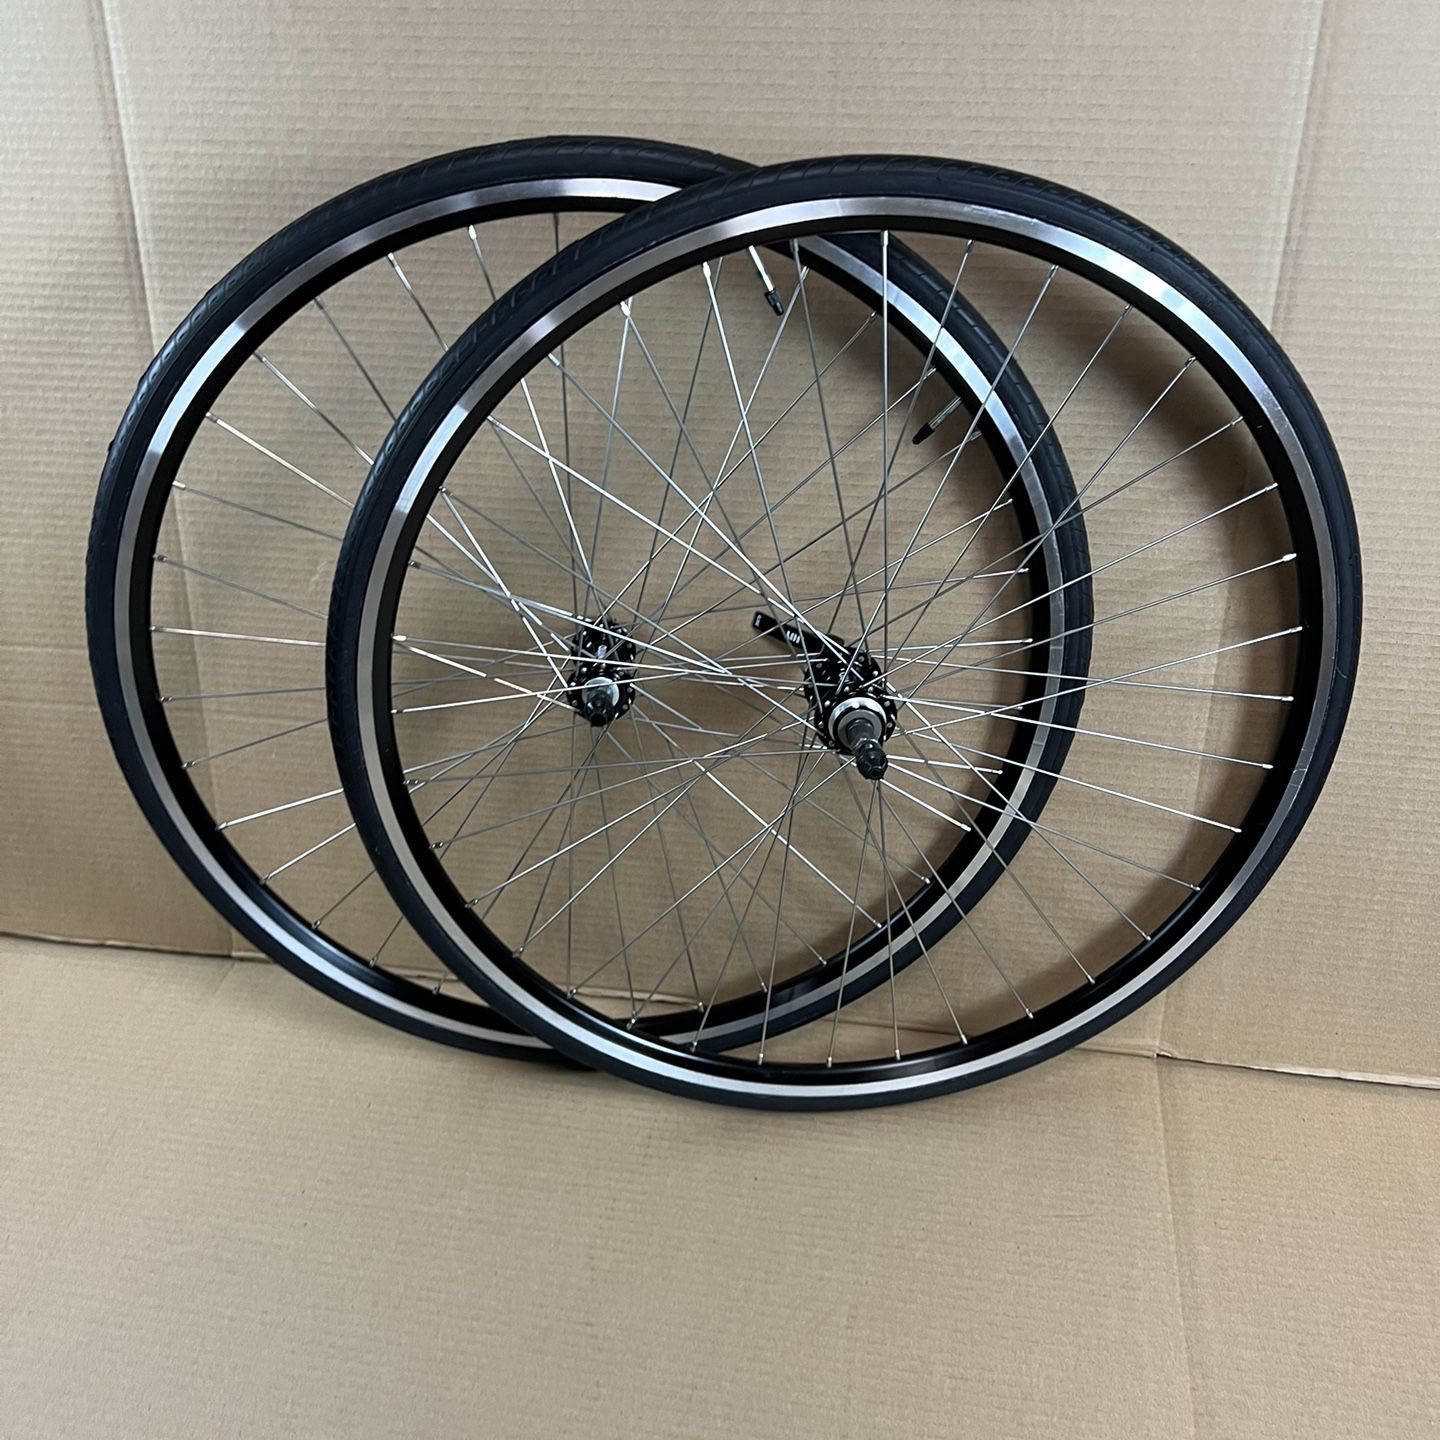 Road Bike Bicycle 700C Double Wall Alloy Wheelset - Compatible with 6/7/8 Speed Thread-on Freewheel  $199